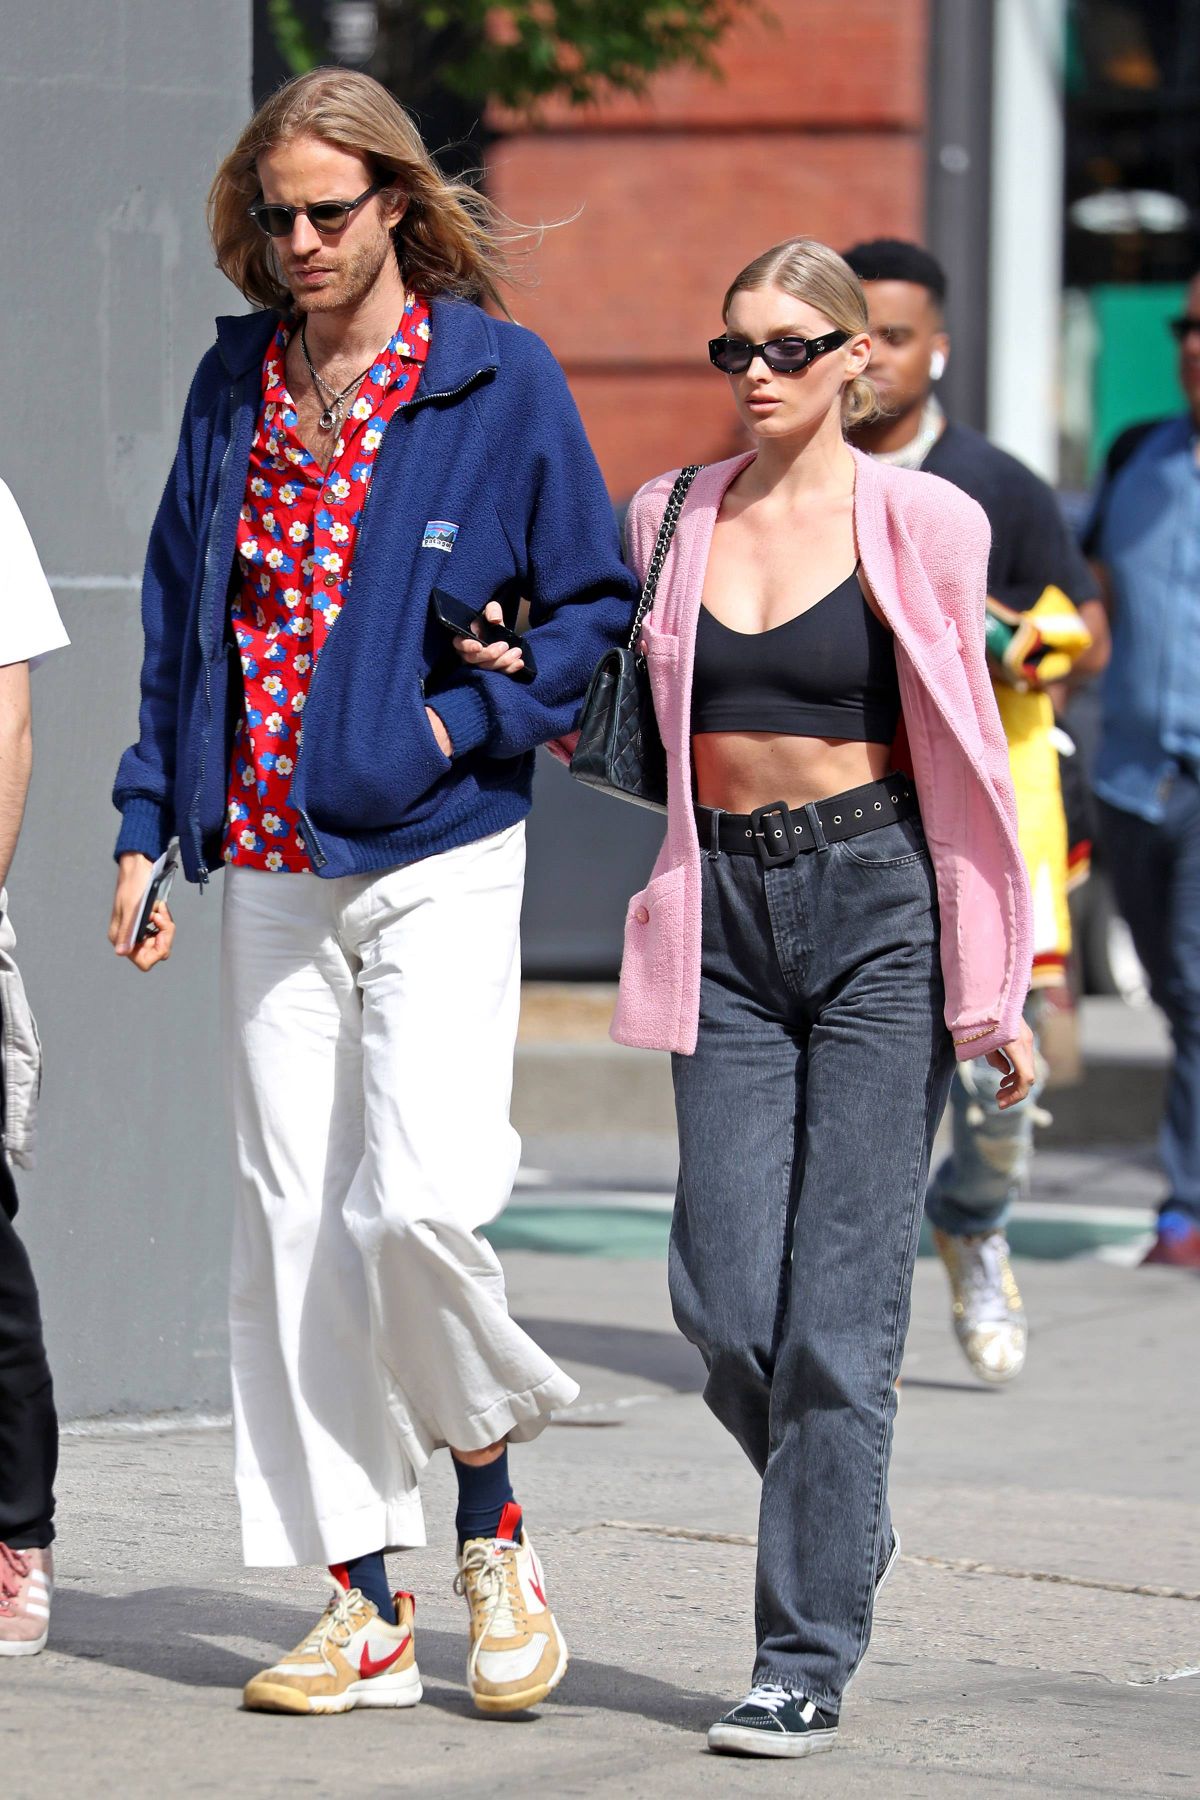 elsa-hosk-and-tom-daly-out-in-new-york-05-09-2019-1.jpg